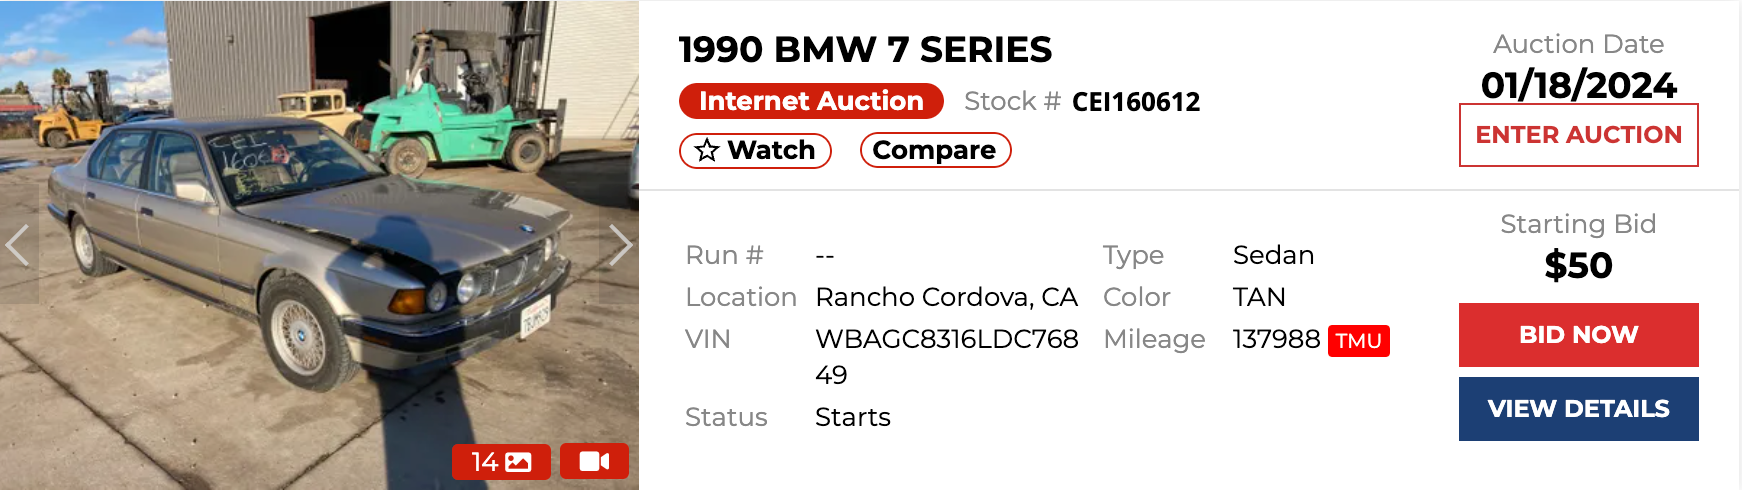 Capital City Auto Auction helps you decipher odometer fraud when you bid on vehicles.